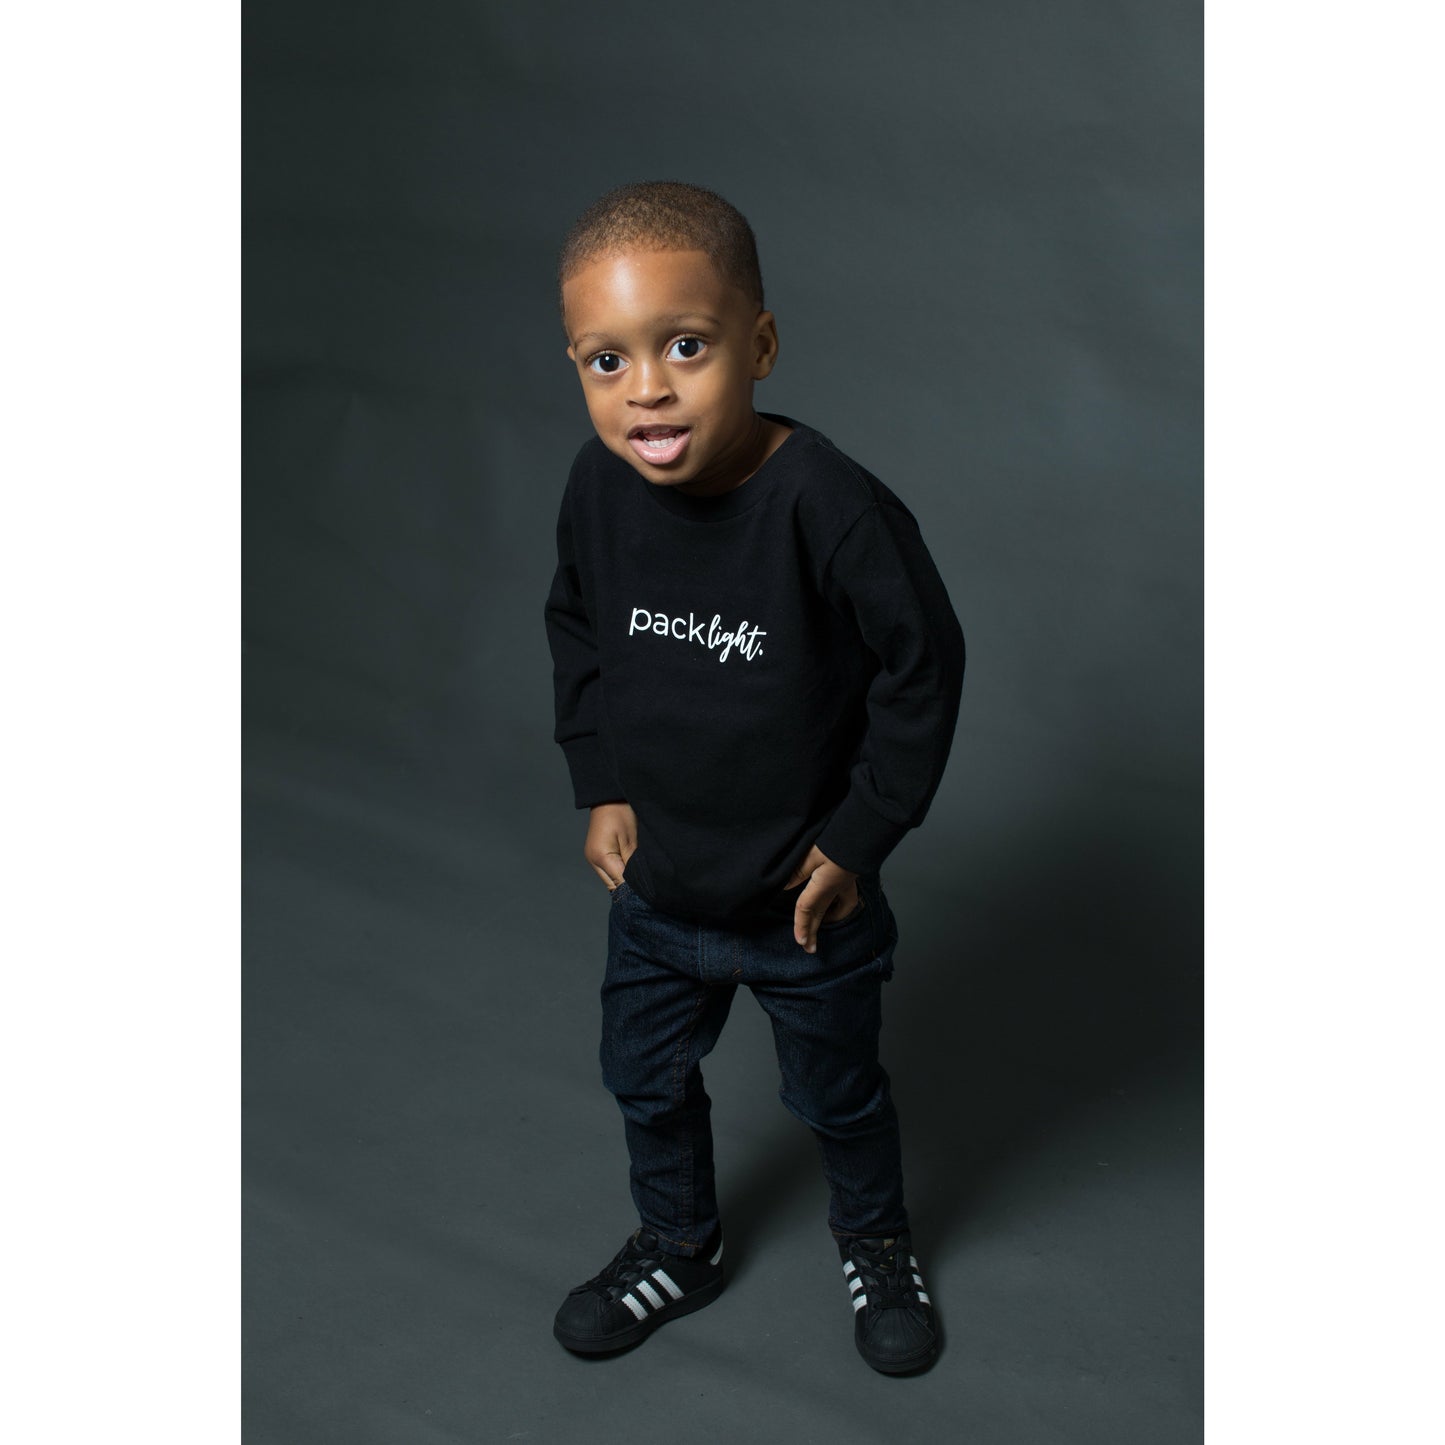 boy model wearing black long sleeve affirmation tee that says Pack Light by Sol Rise Essentials 